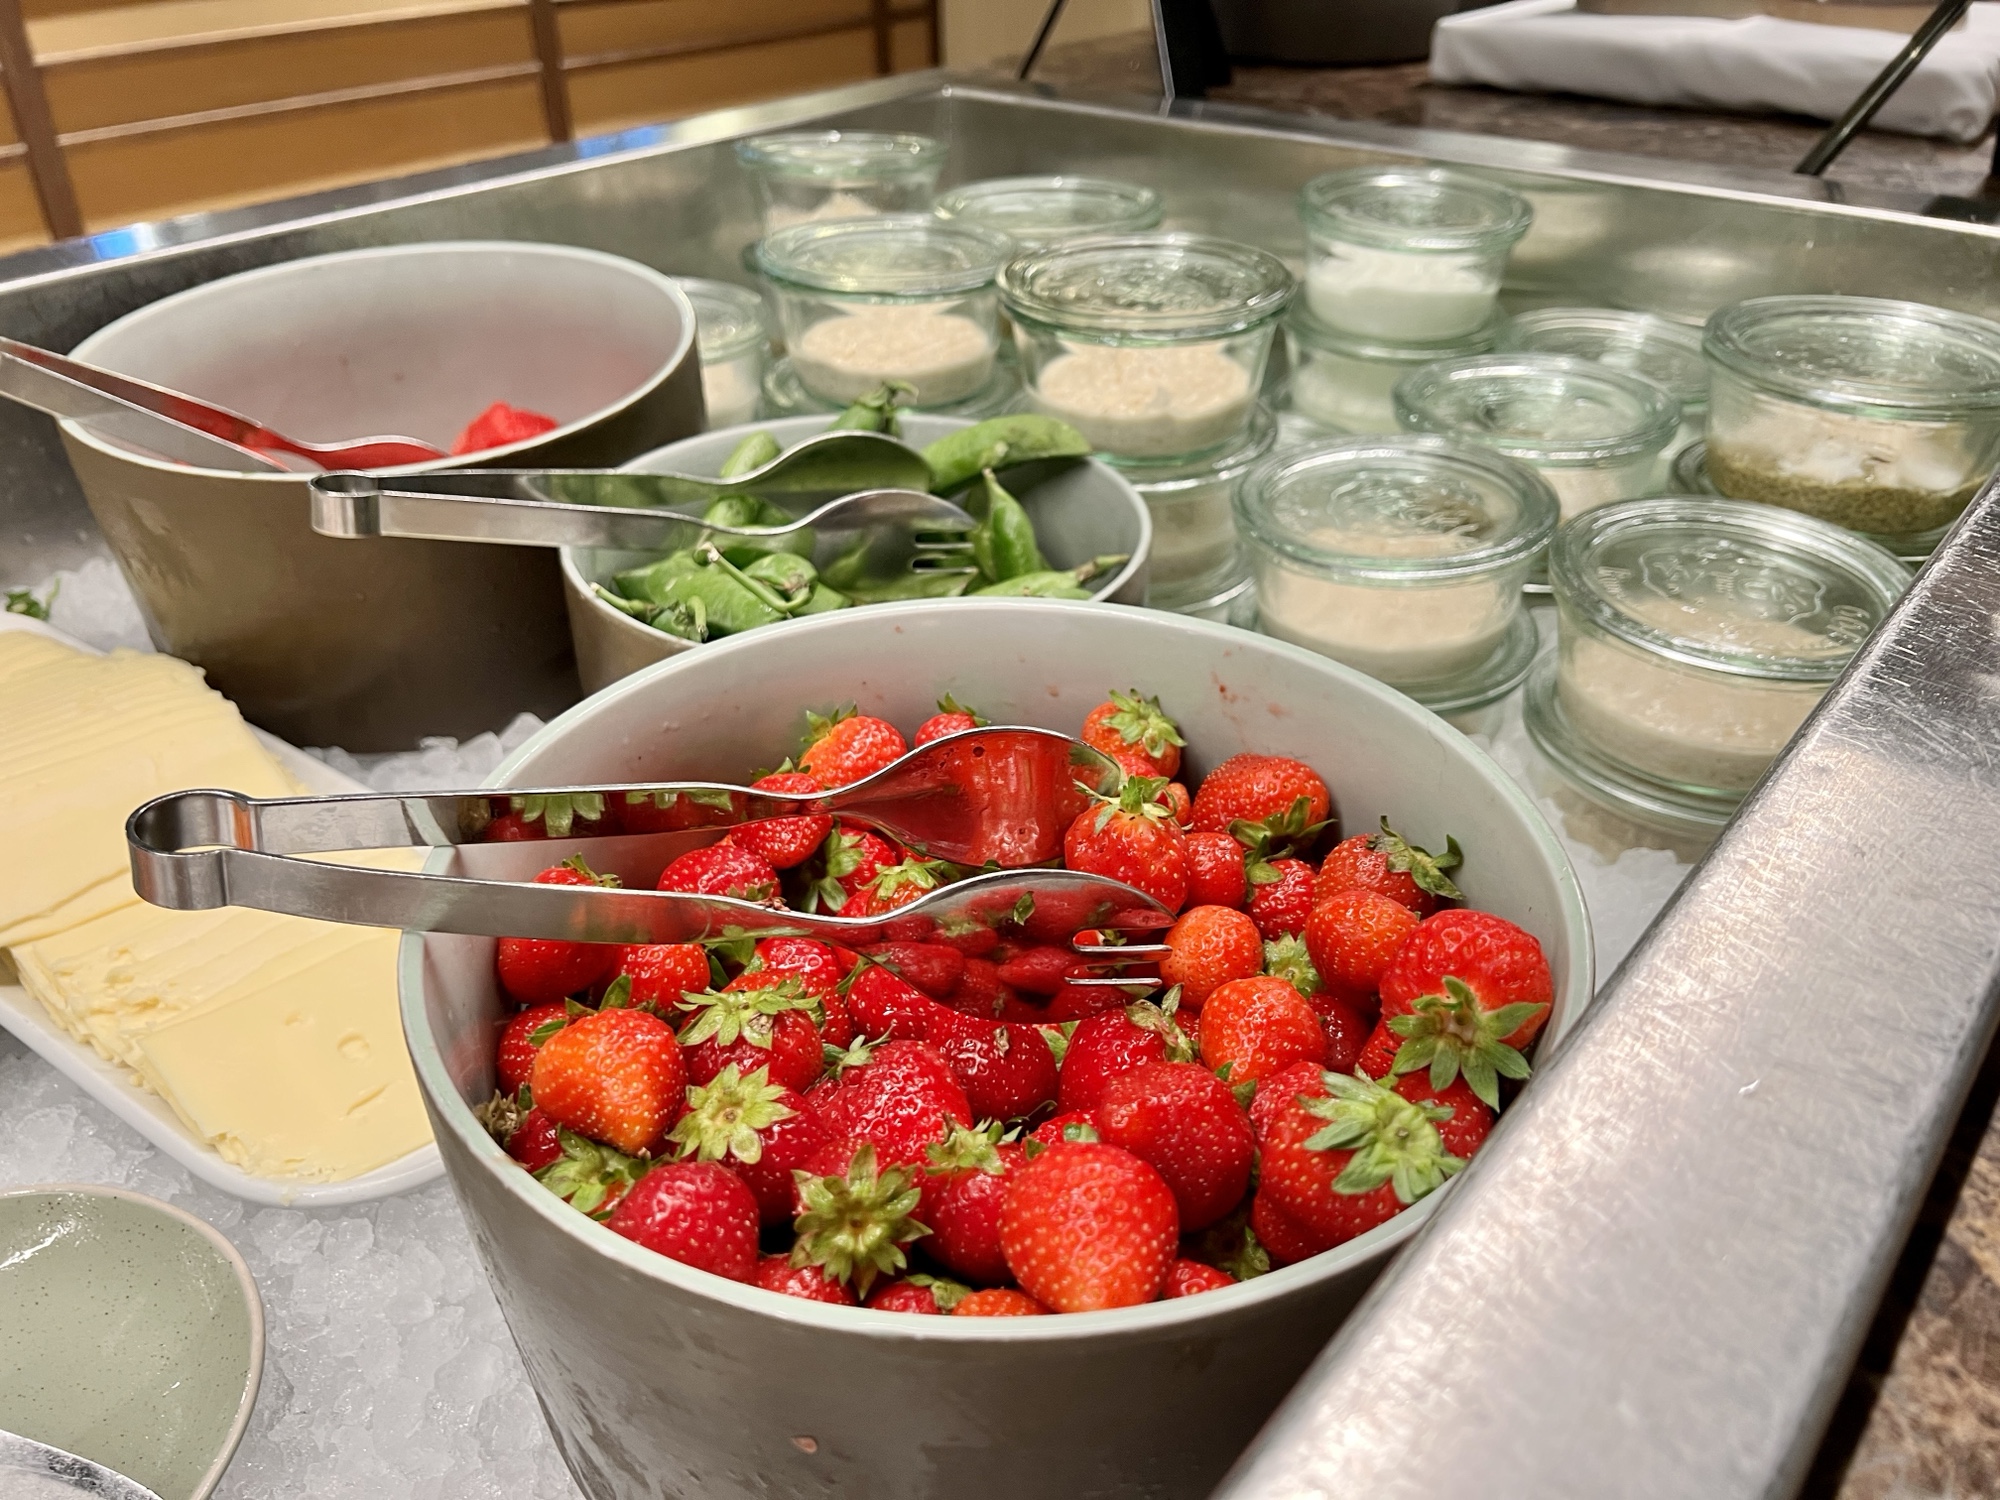 a bowl of strawberries and other food items